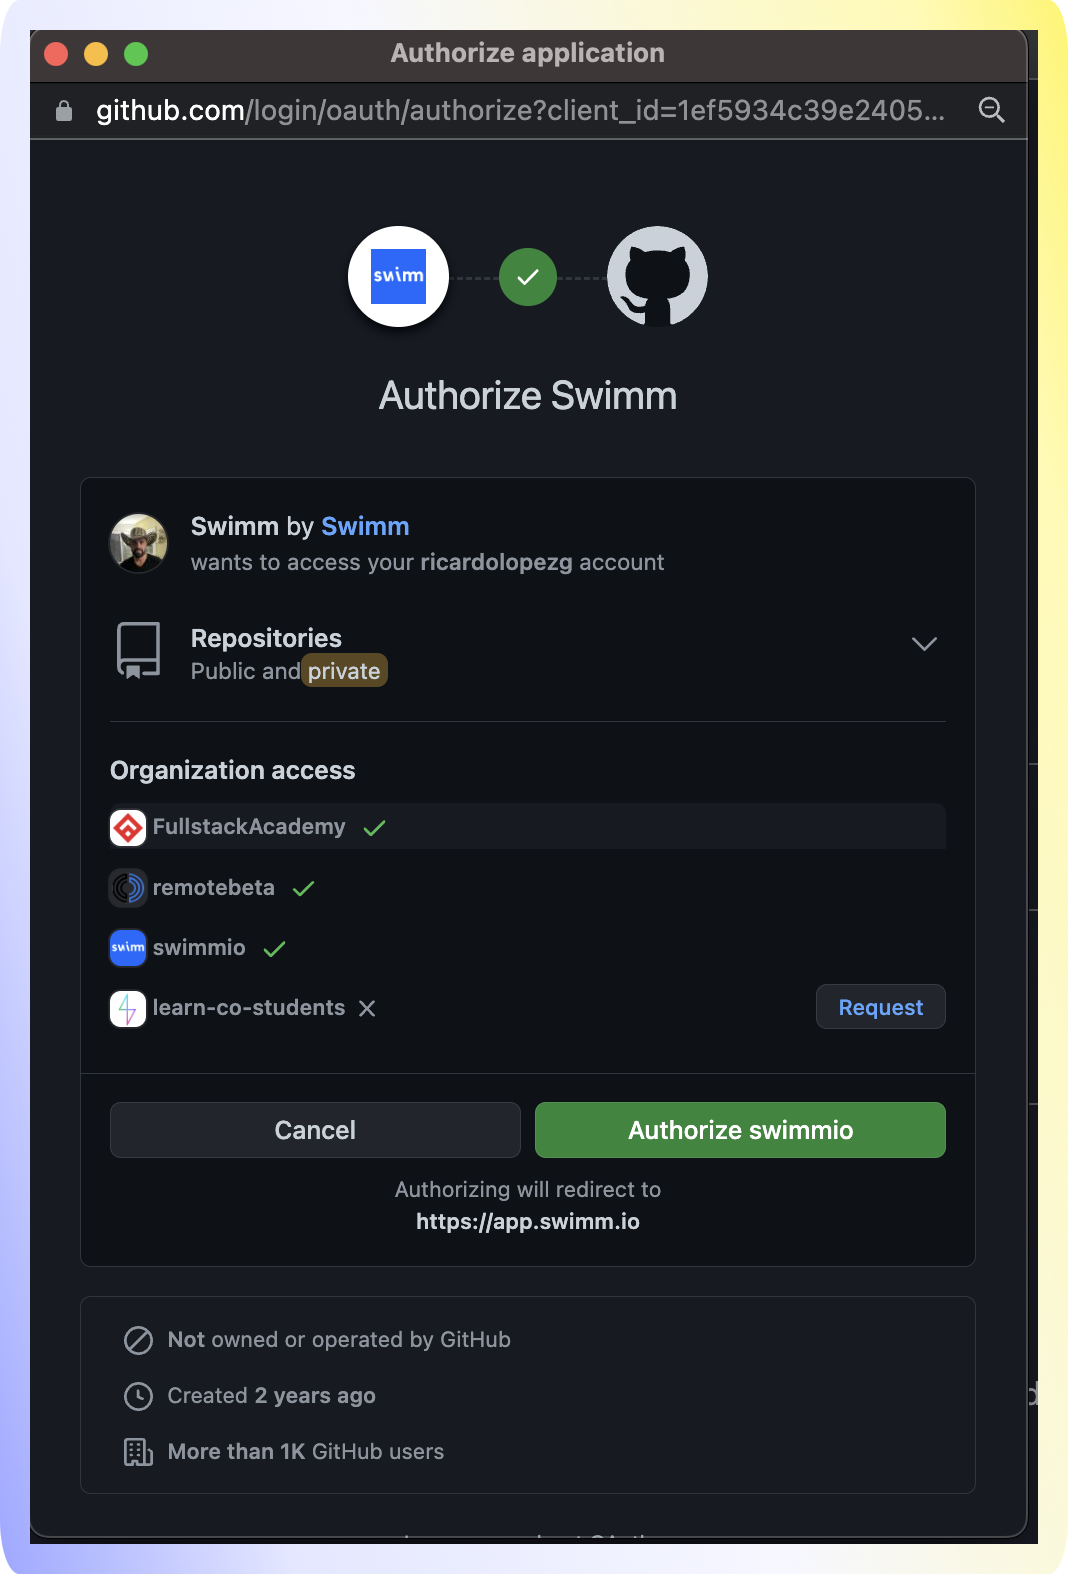 GitHub modal to authorize Swimm within your organization